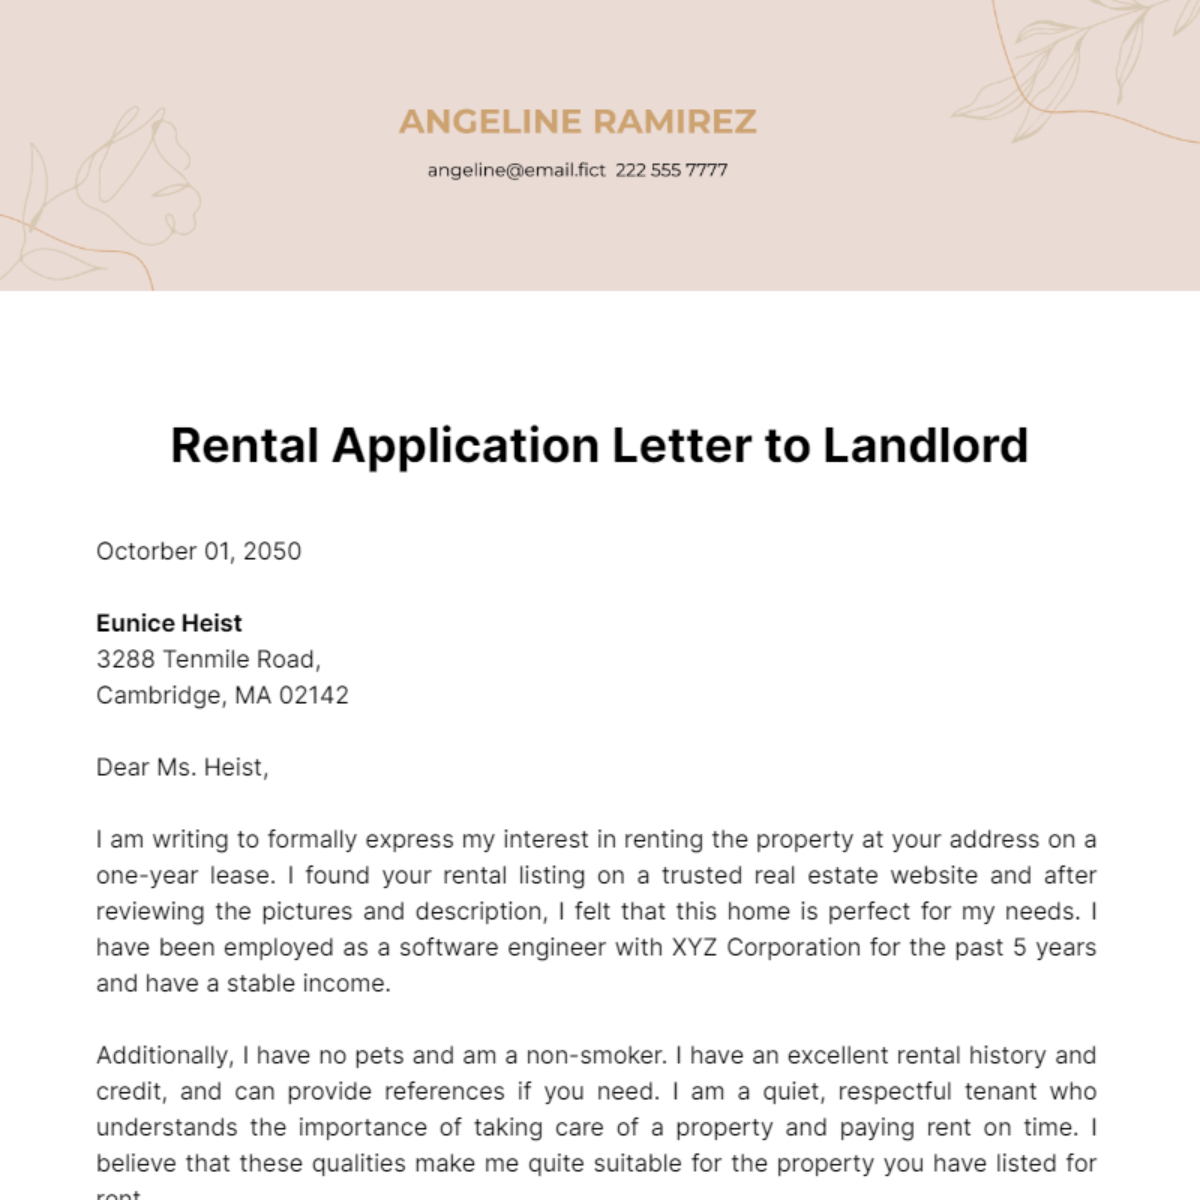 Rental Application Letter to Landlord Template